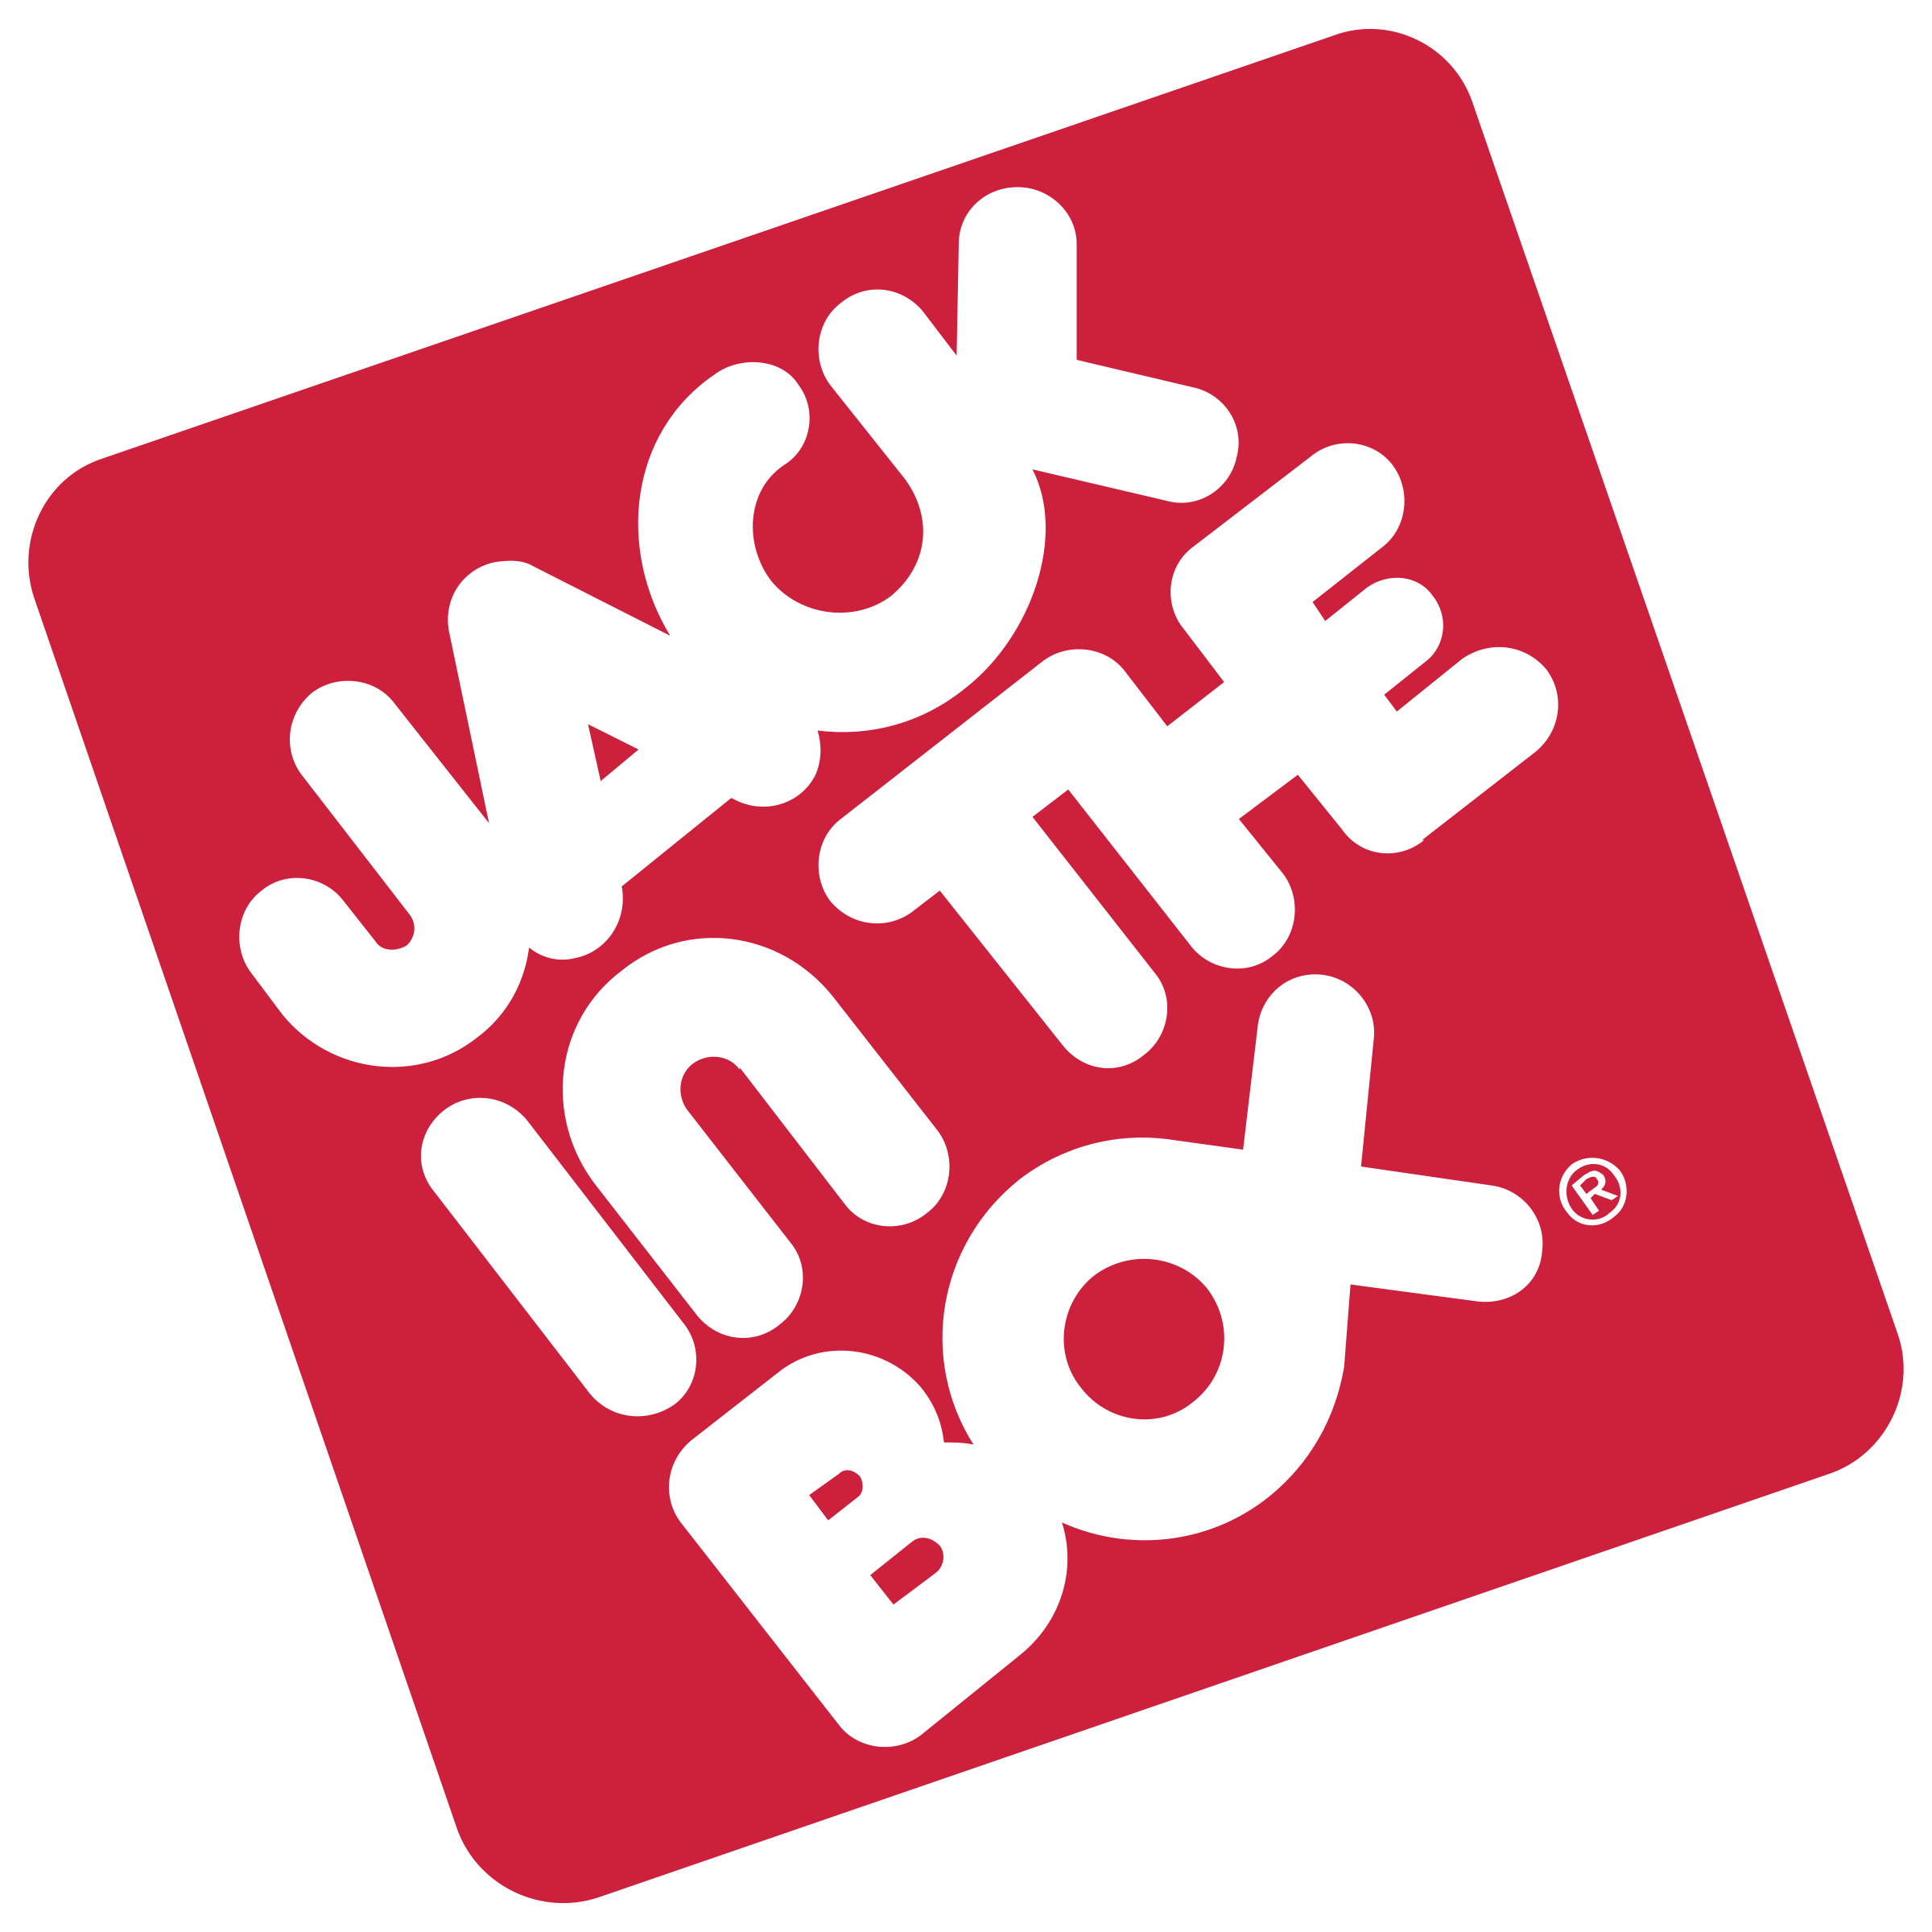 Jack In The Box Logo Black And White - Jack In The Box Black And White, Transparent background PNG HD thumbnail